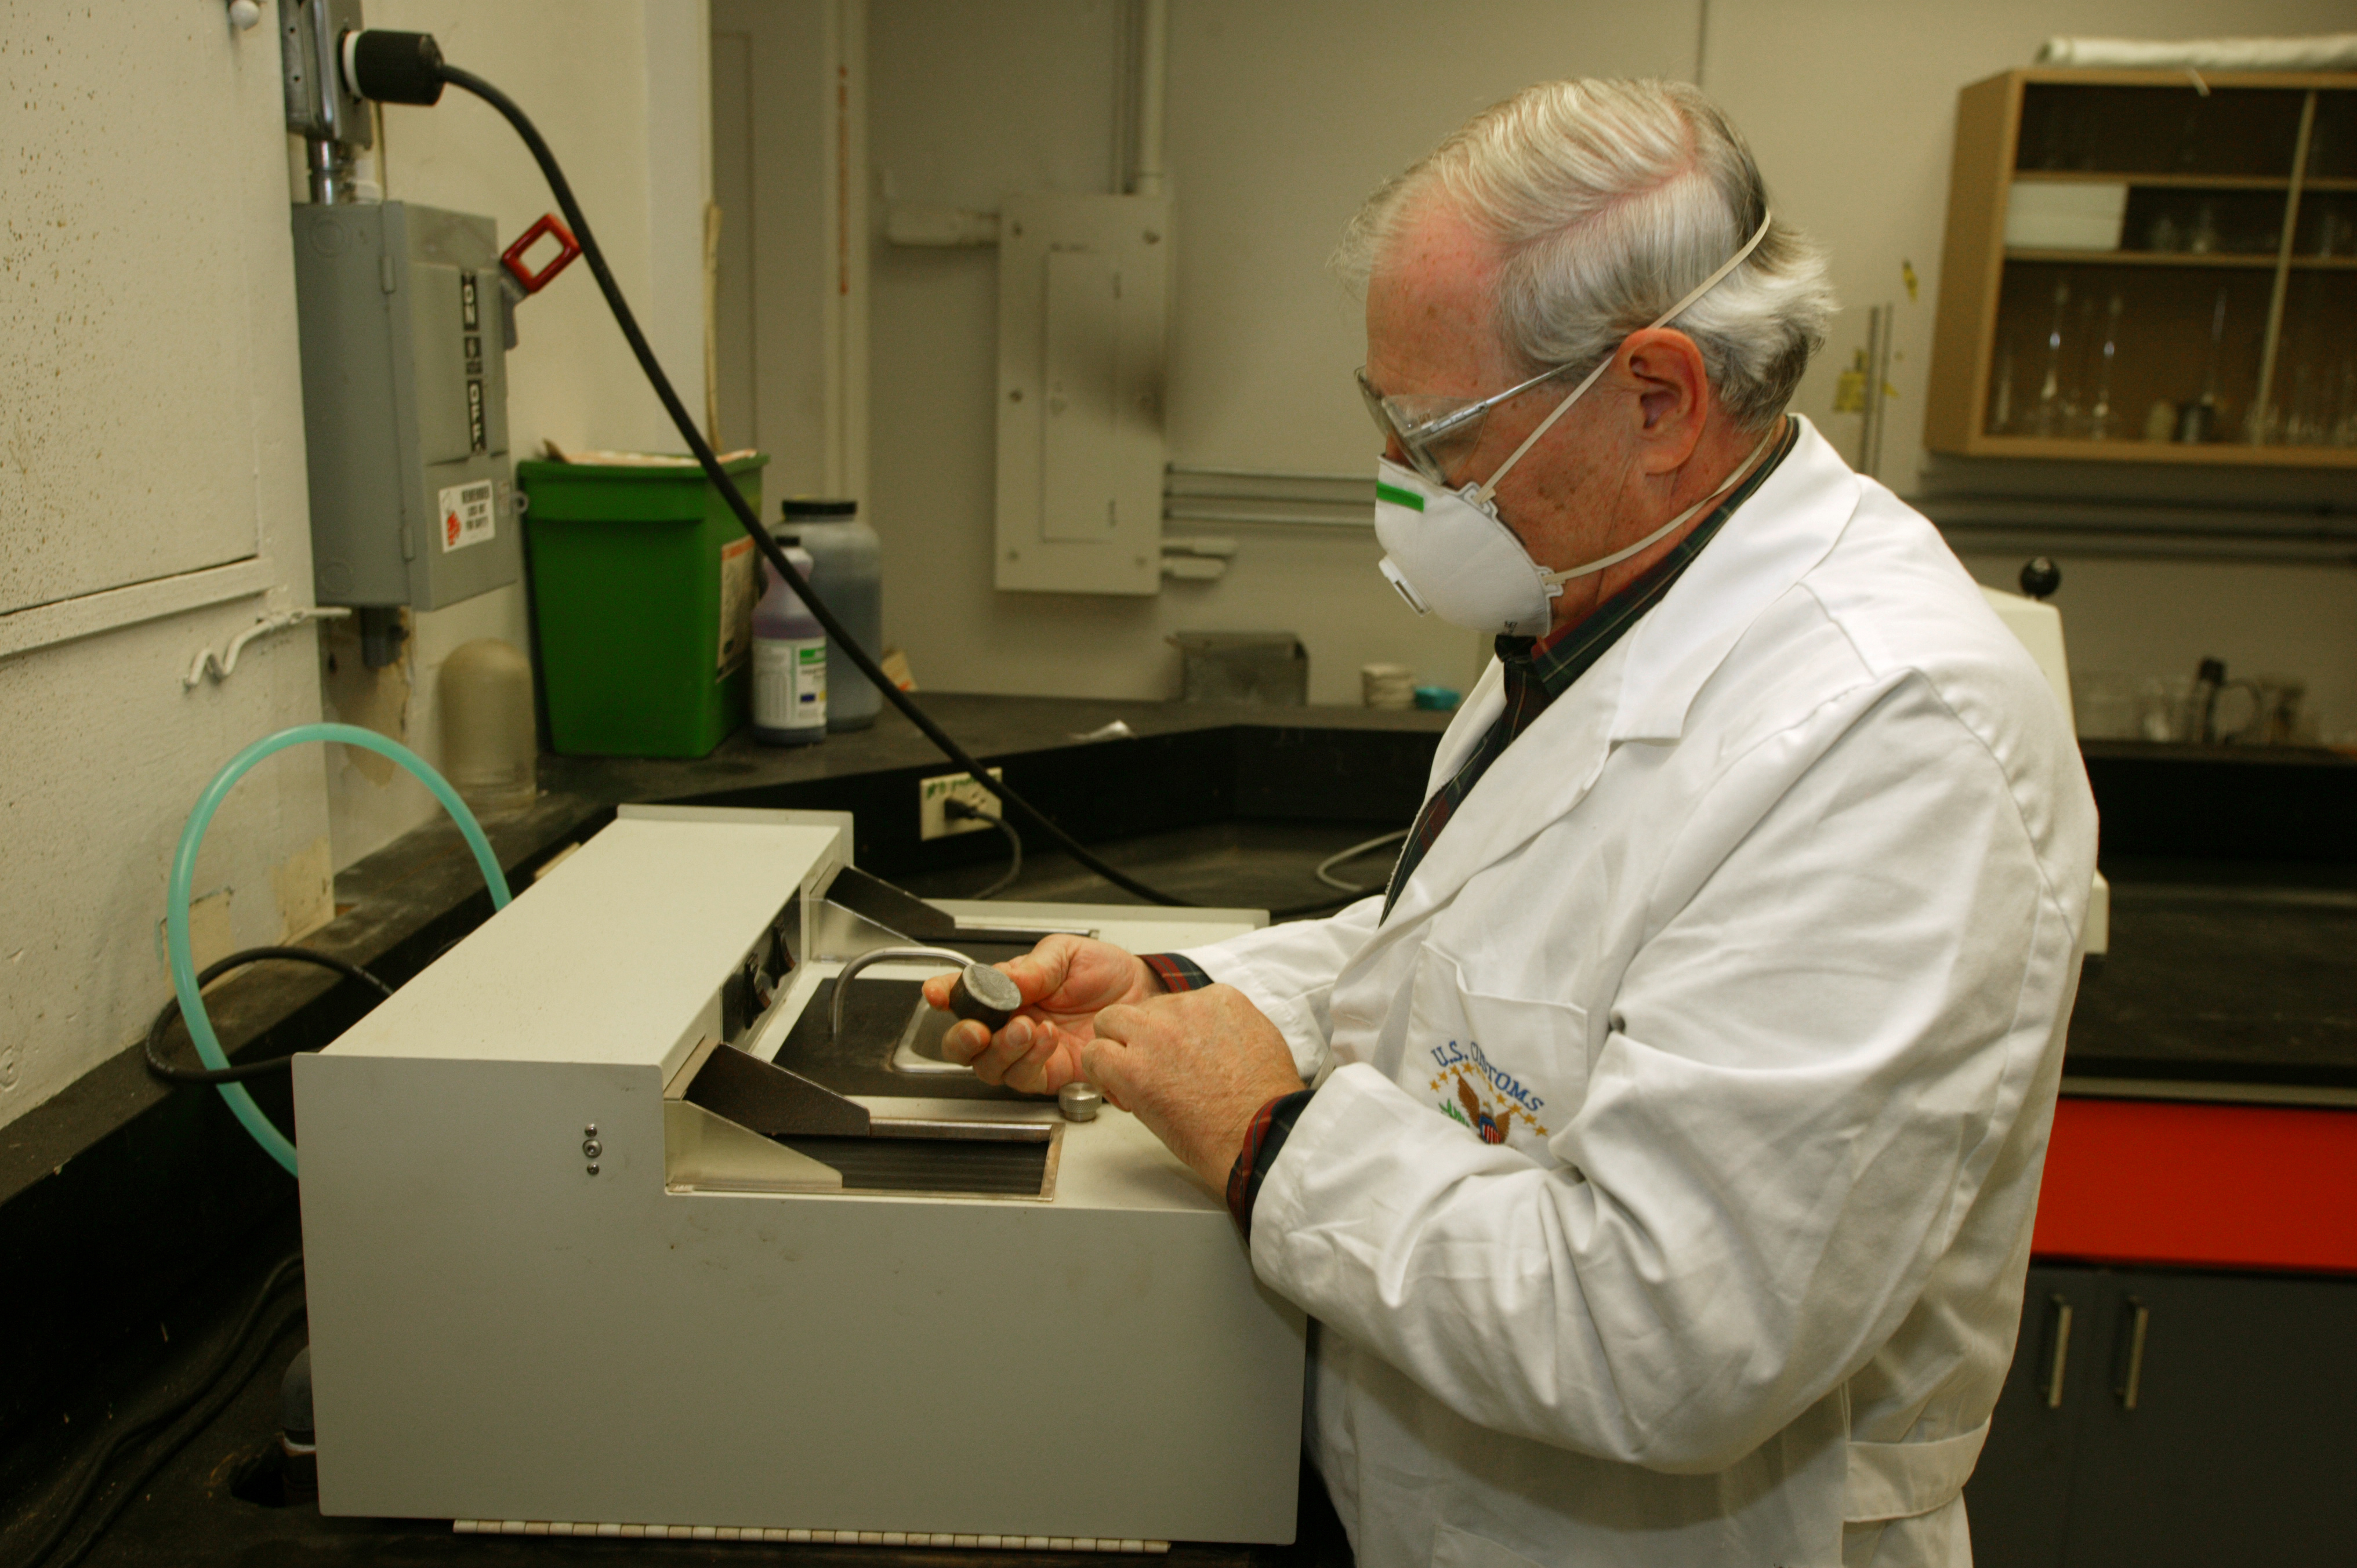 CBP Laboratory personnel grind samples of marble  material imported to the U.S. for testing.